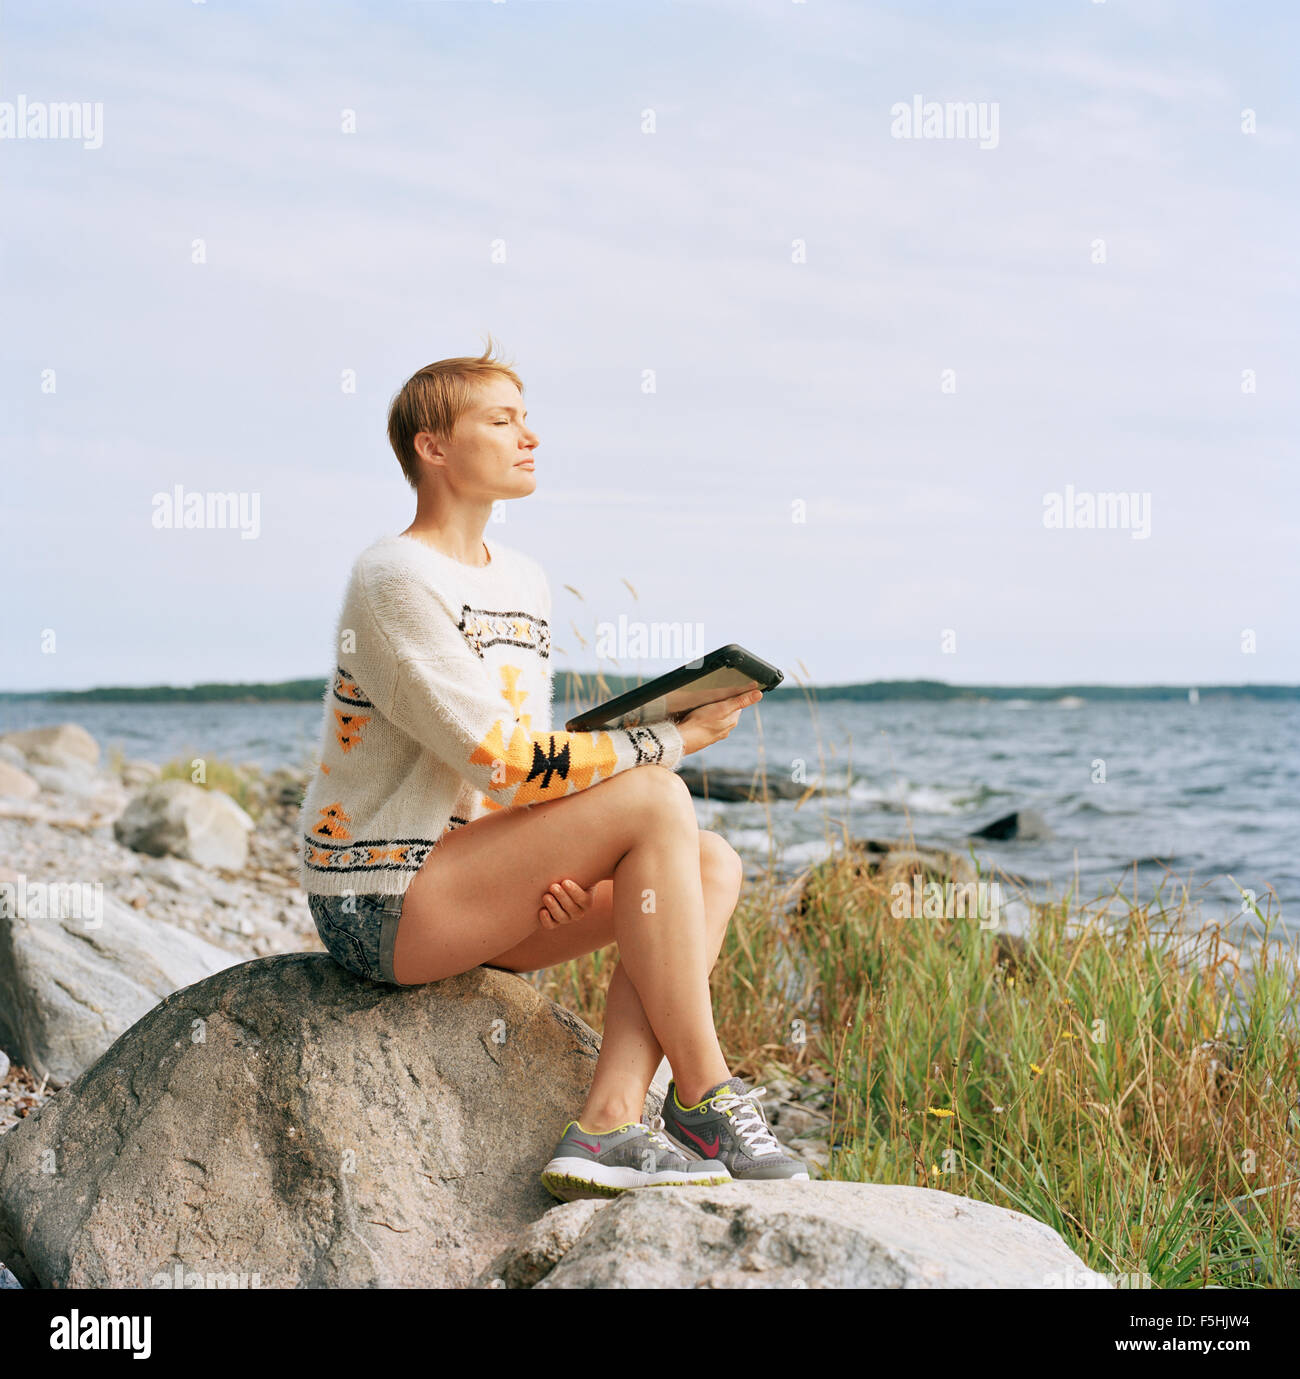 Sweden, Sodermanland, Galo, Woman using tablet pc at beach Stock Photo